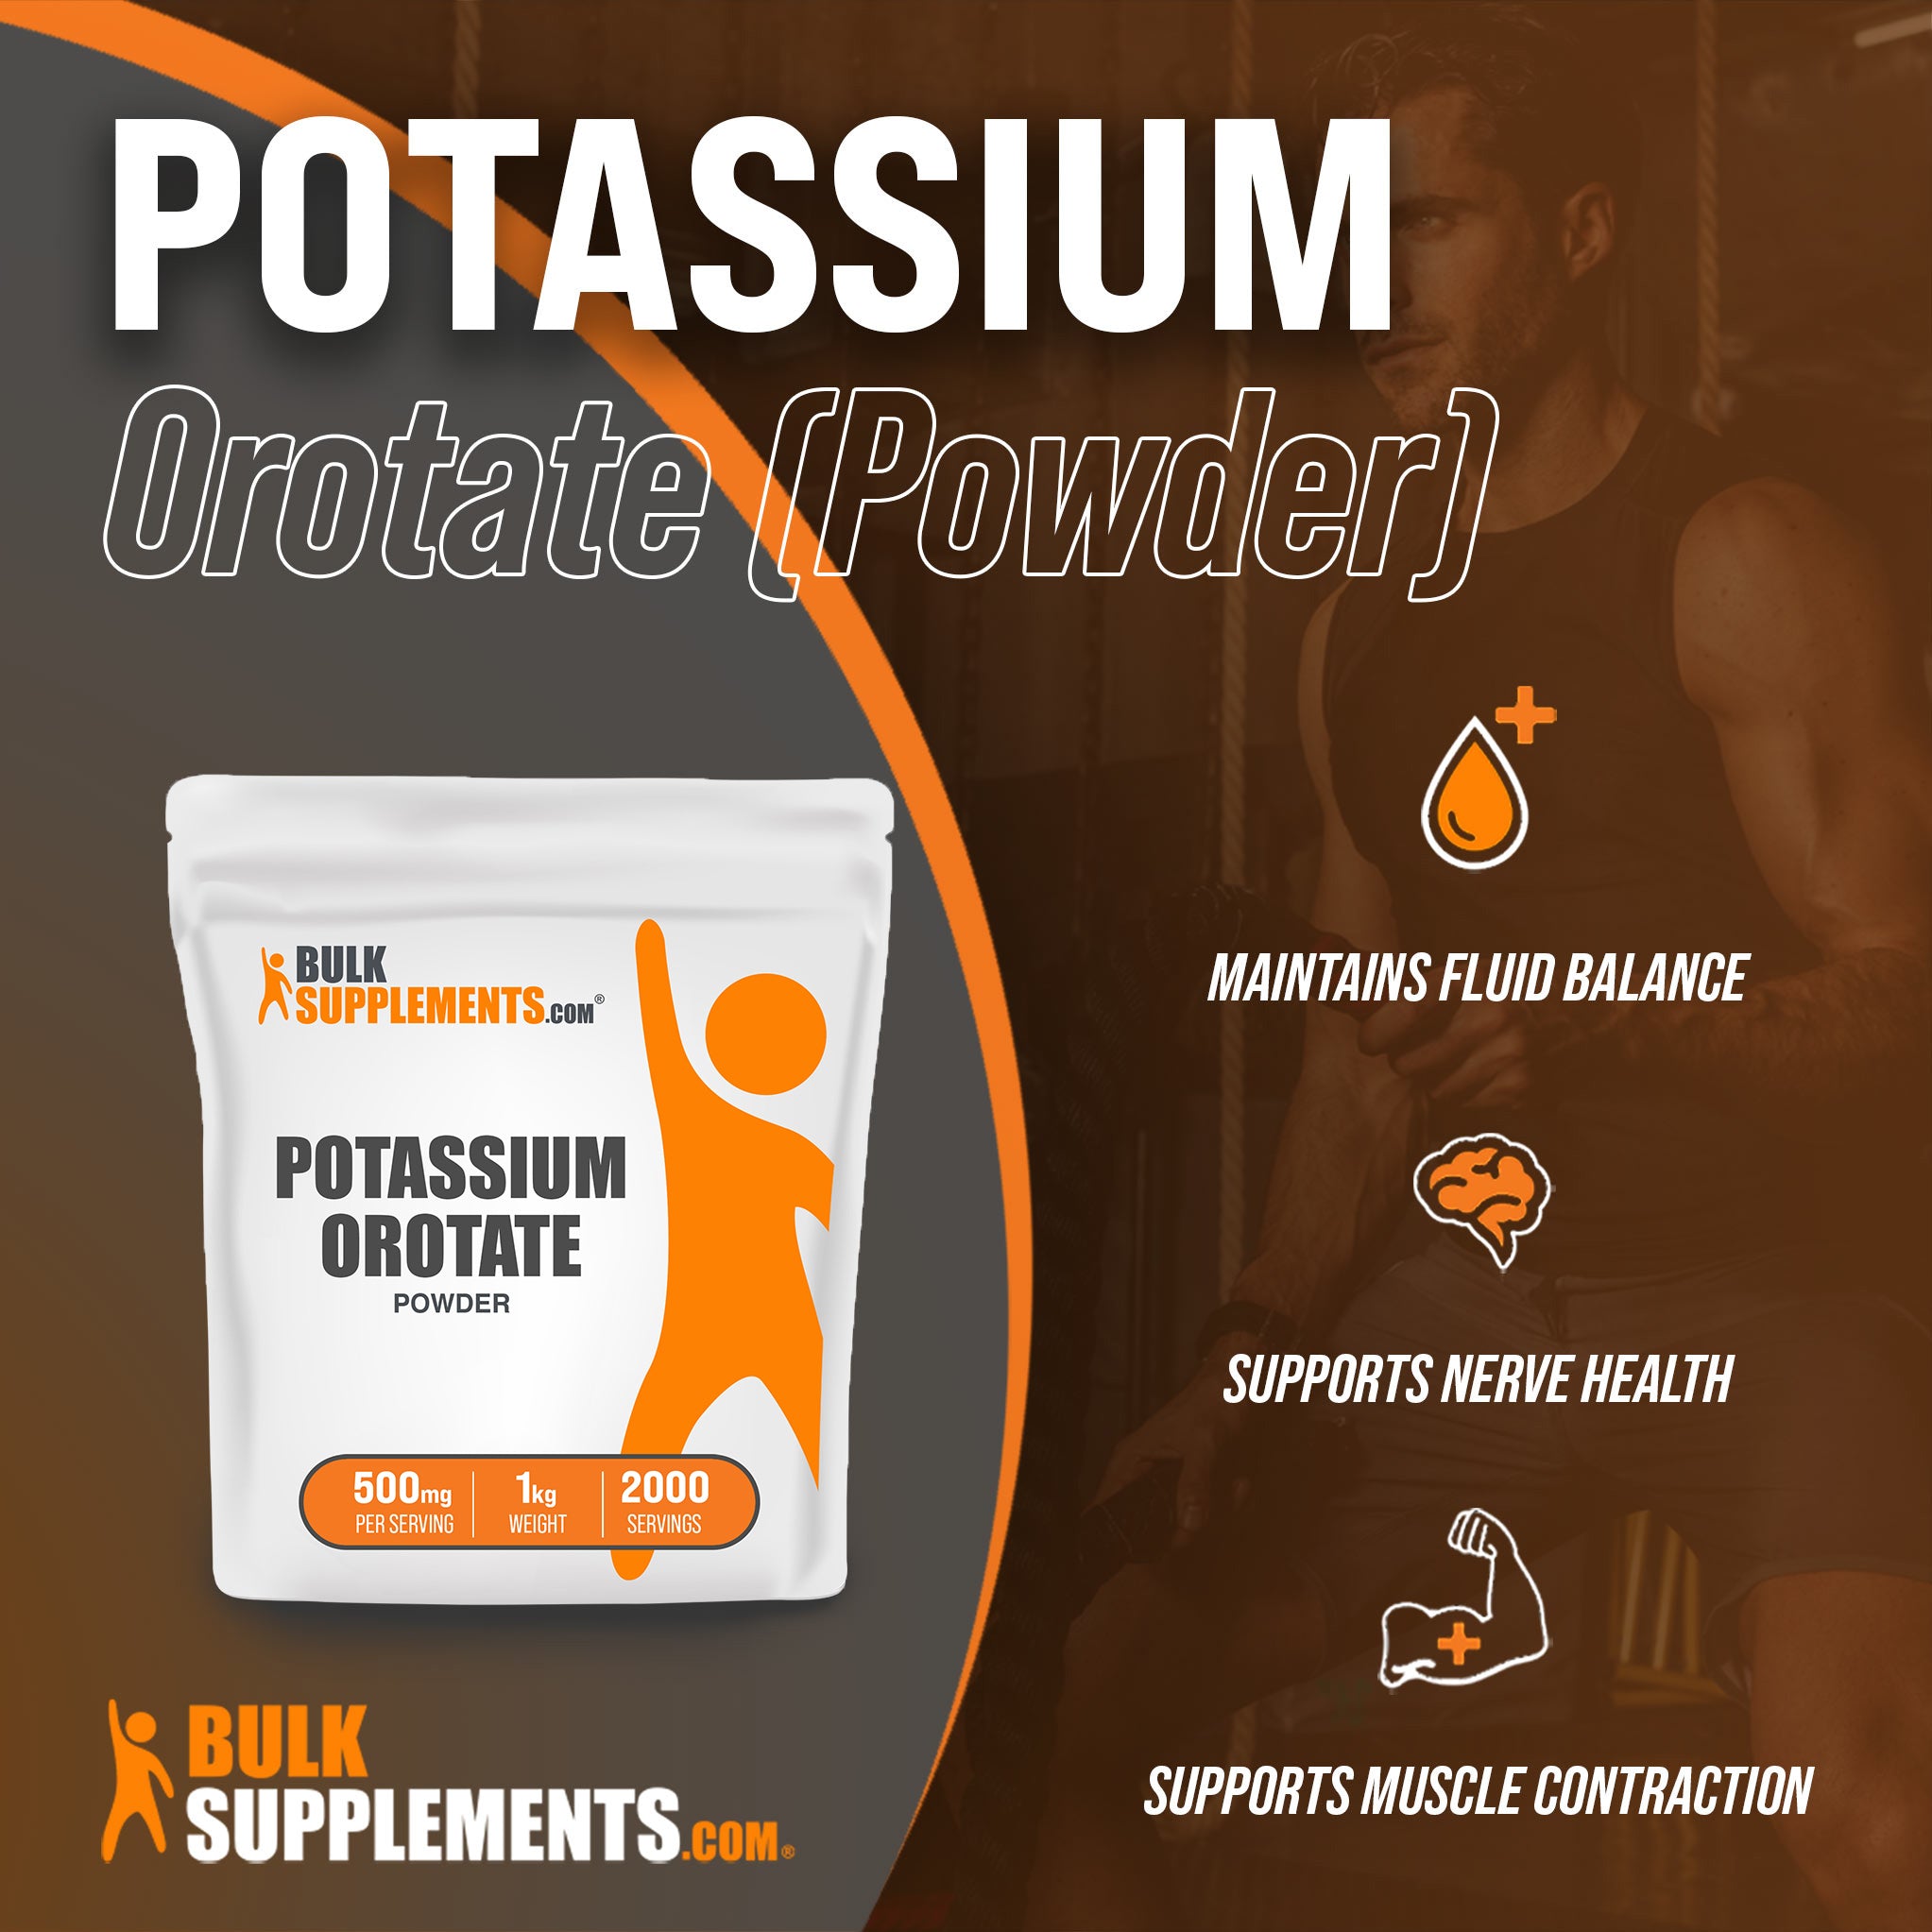 Benefits of Potassium Orotate: maintains fluid balance, supports nerve health, supports muscle contraction